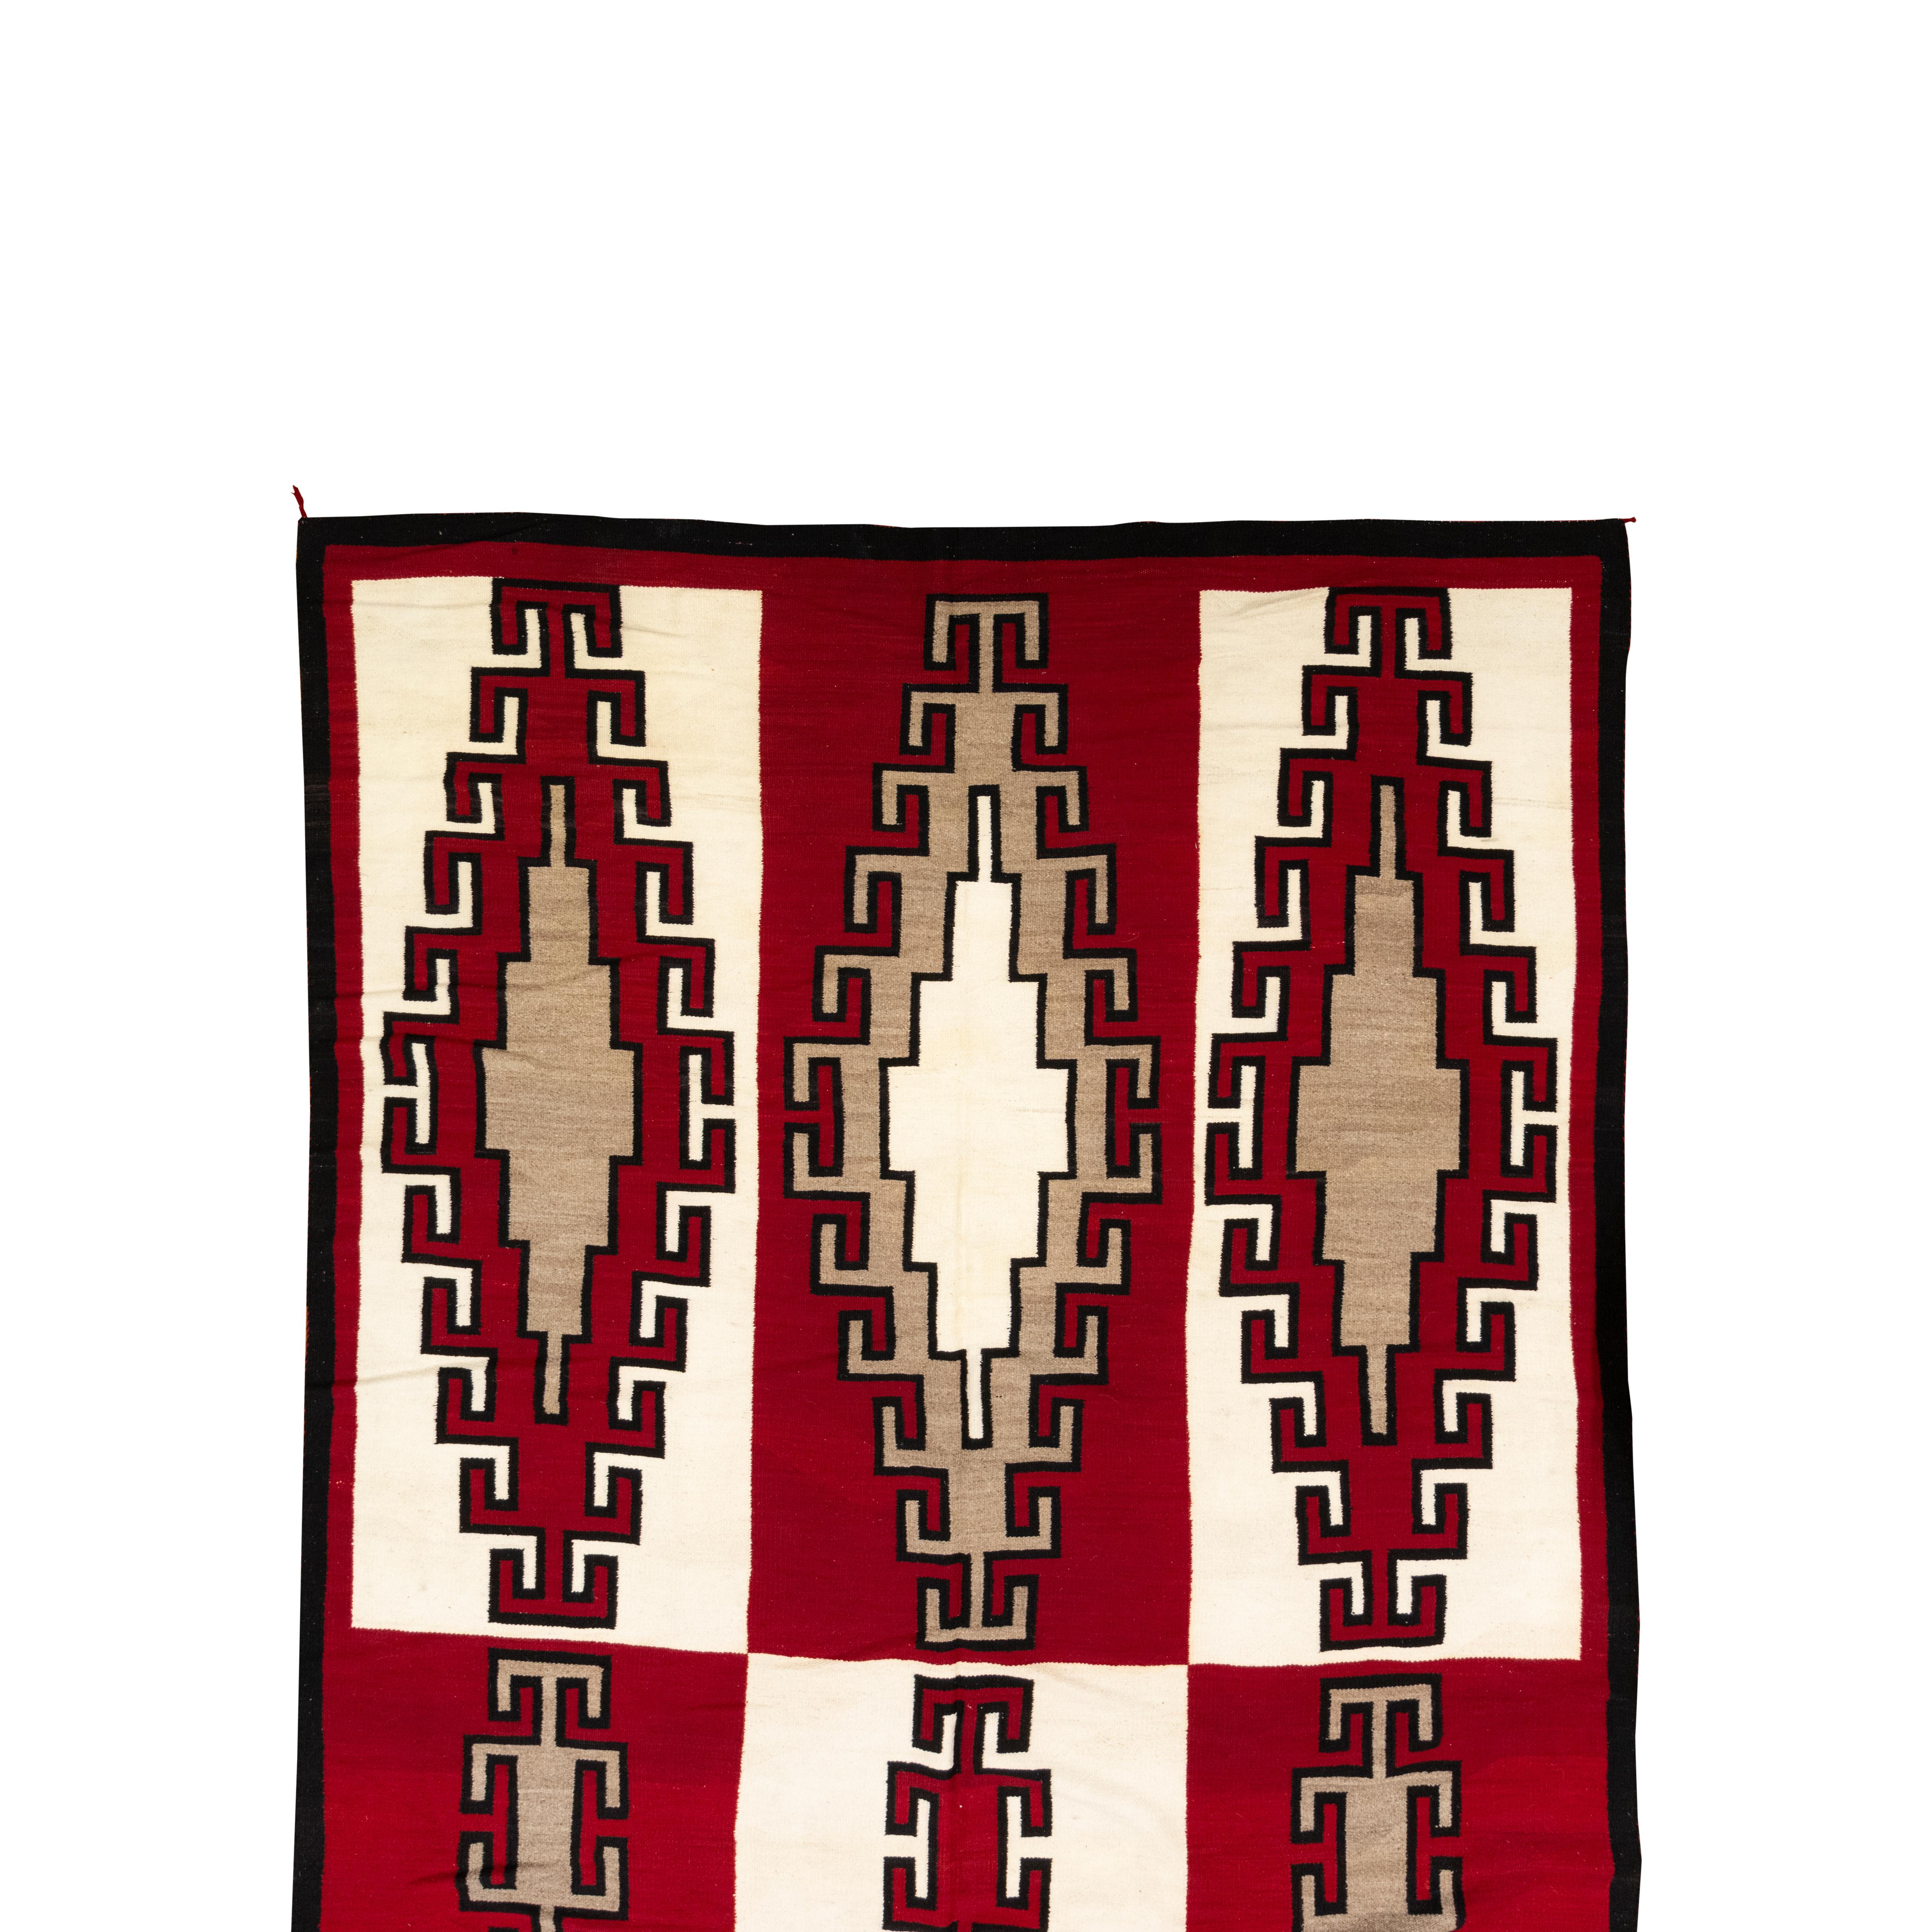 Navajo nine panel Ganado area weaving. 7’11” x 14’. Beautiful and bright reds, creams and browns with geometric patterns. Very little if any wear. 

Origin: Navajo, Southwest
Period: Circa 1920 - 30s
Dimensions: 7’11” x 14’

Family Owned &